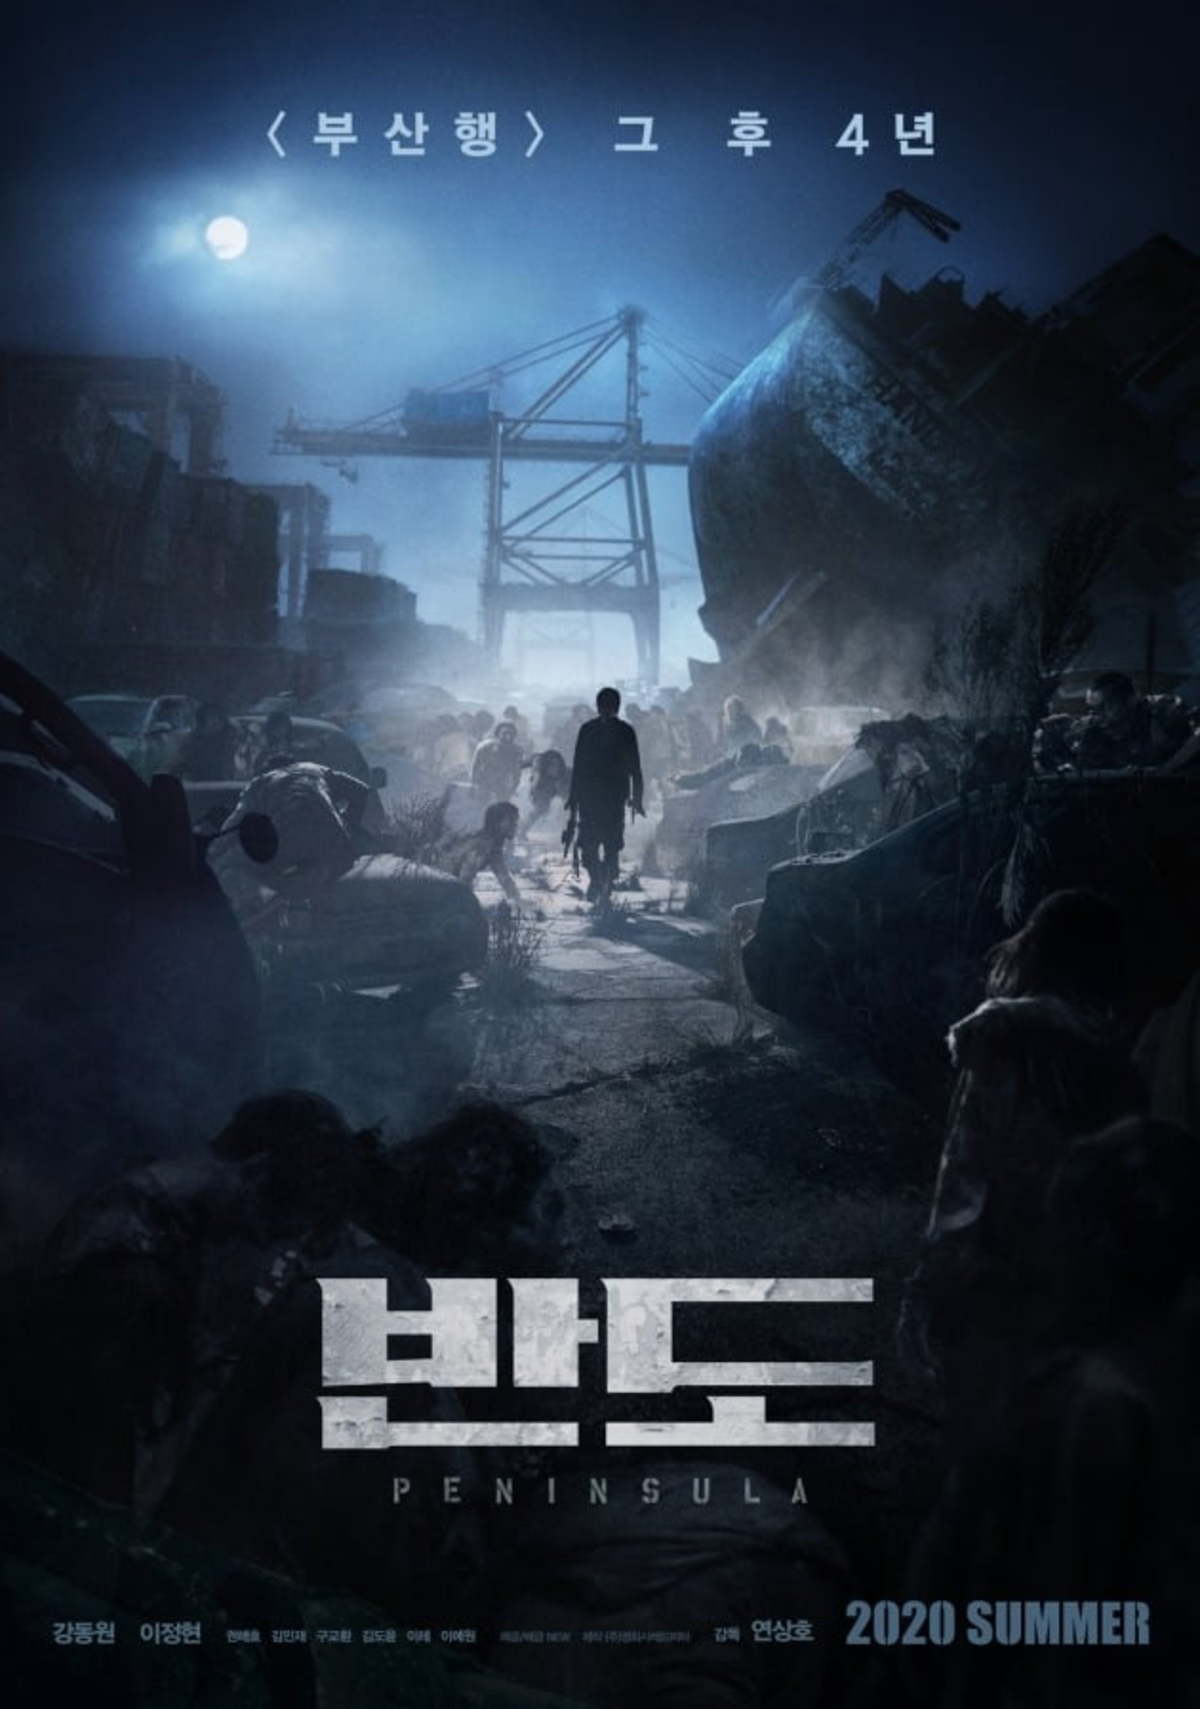 train-to-busan-sequel-film-peninsula-releases-first-trailer-starring-kang-dong-won-1